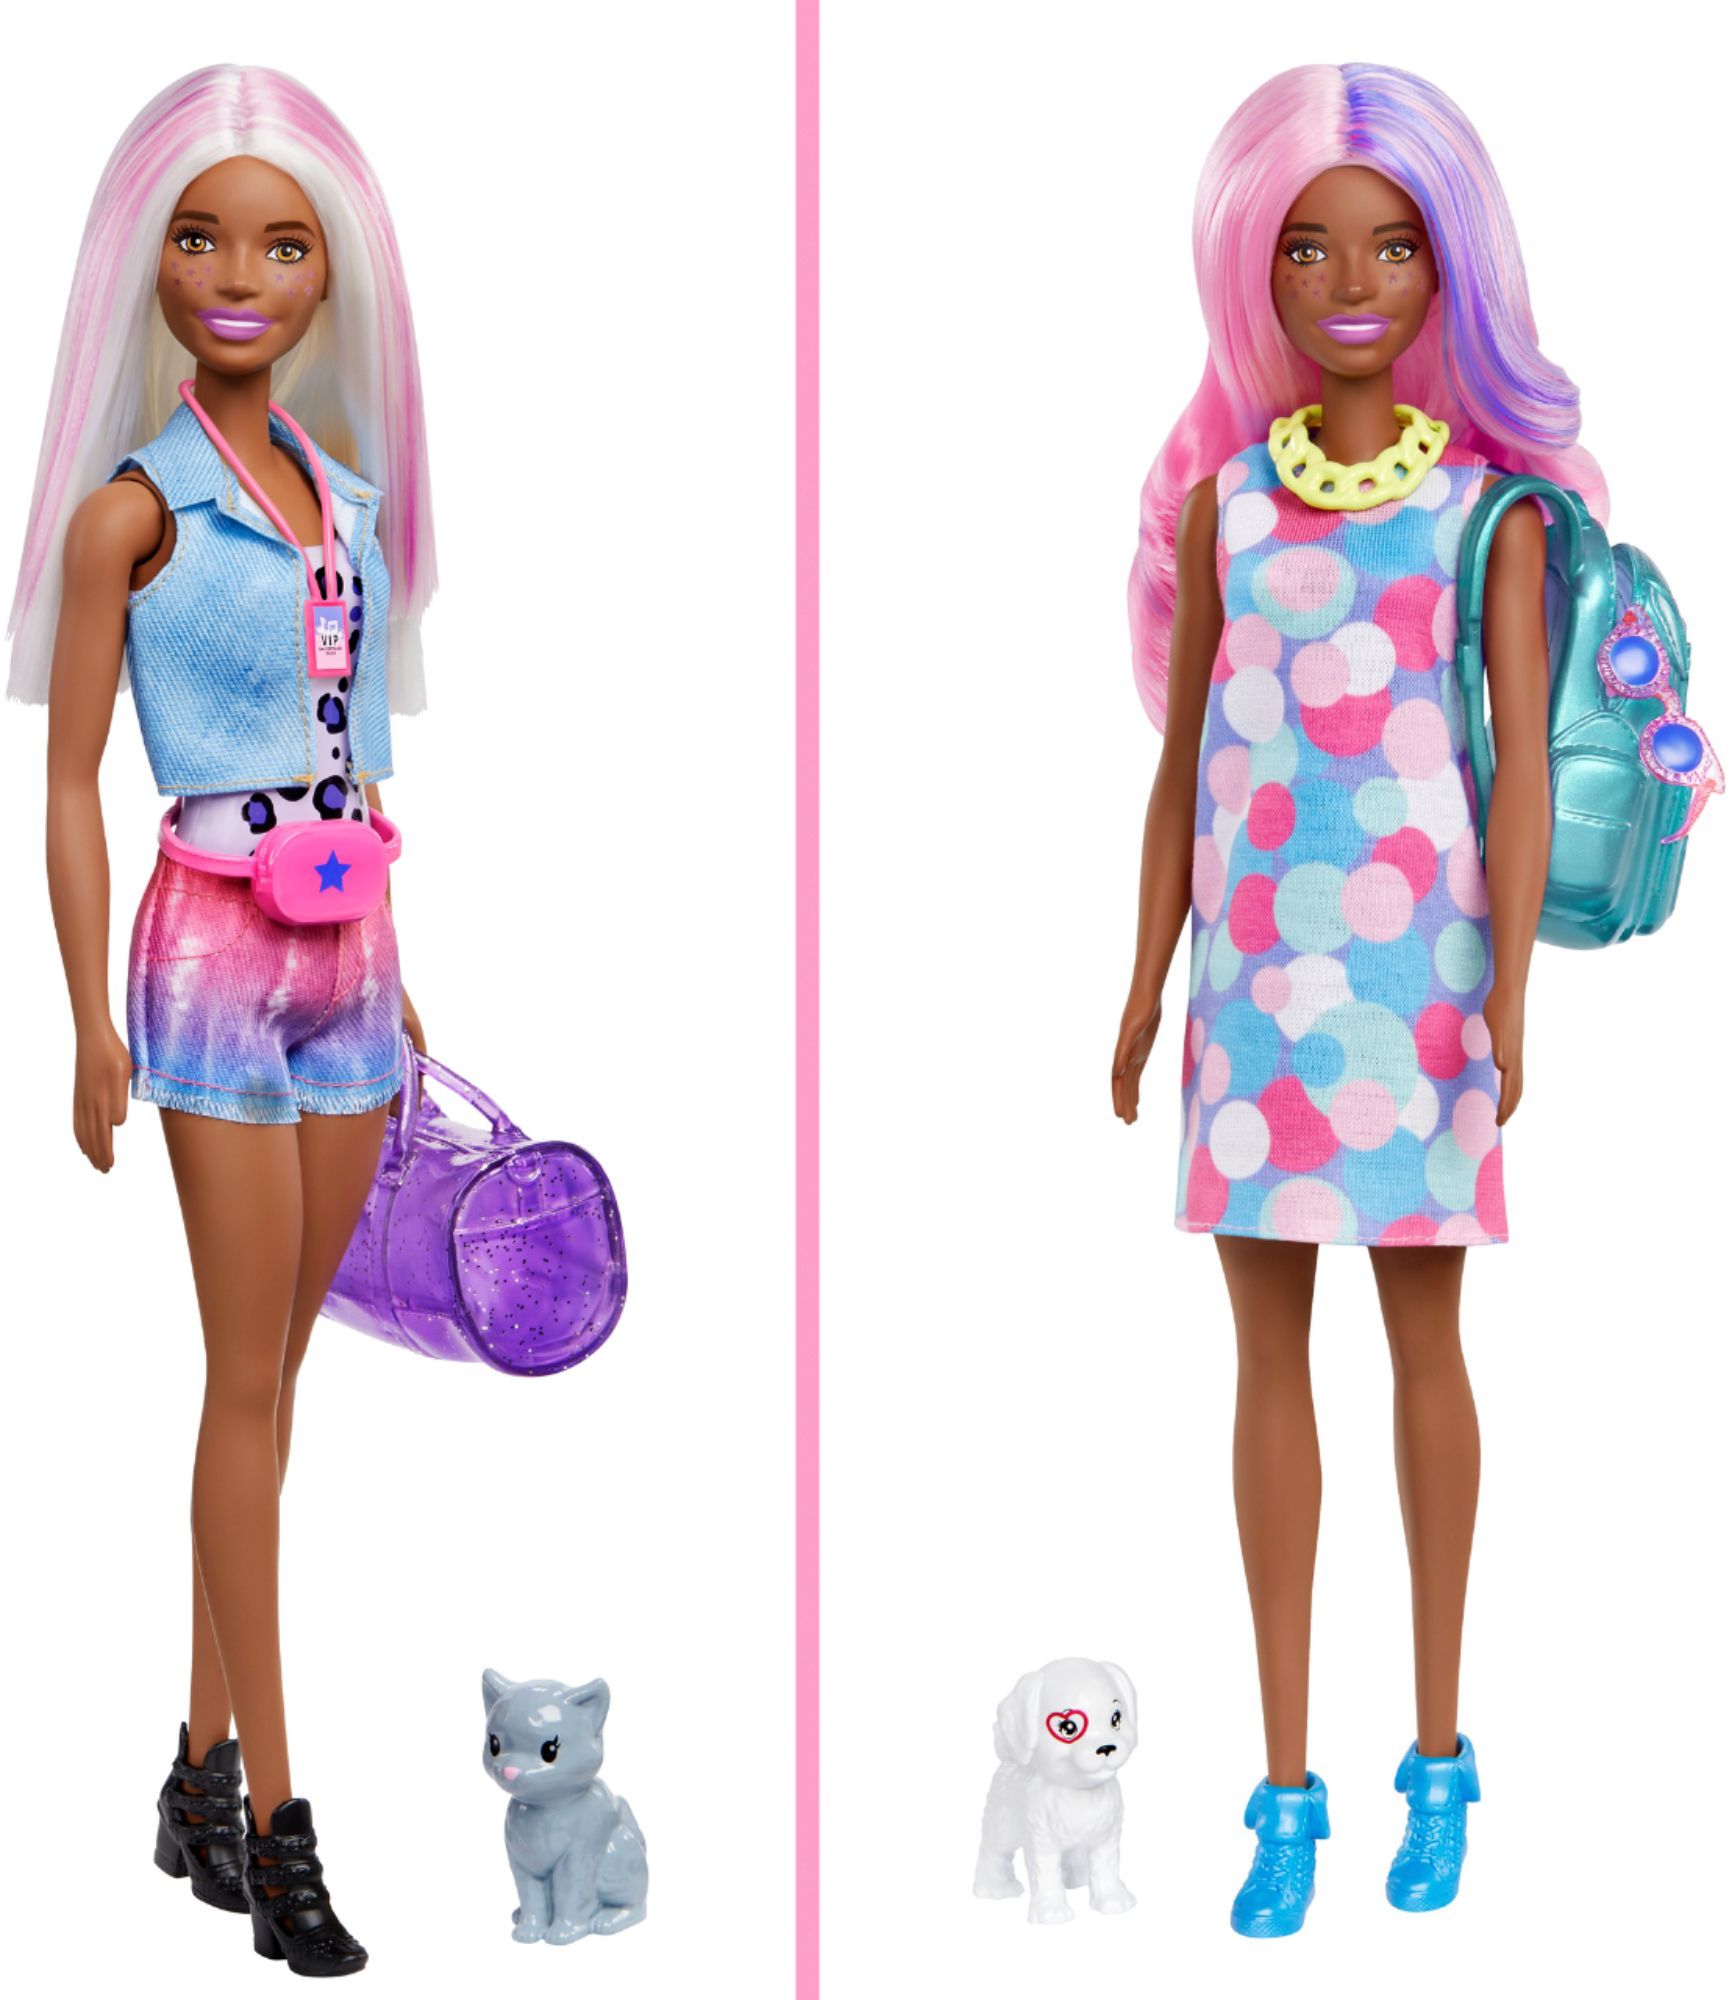 Best Buy: Barbie Color Reveal Surprise Party Dolls and Accessories